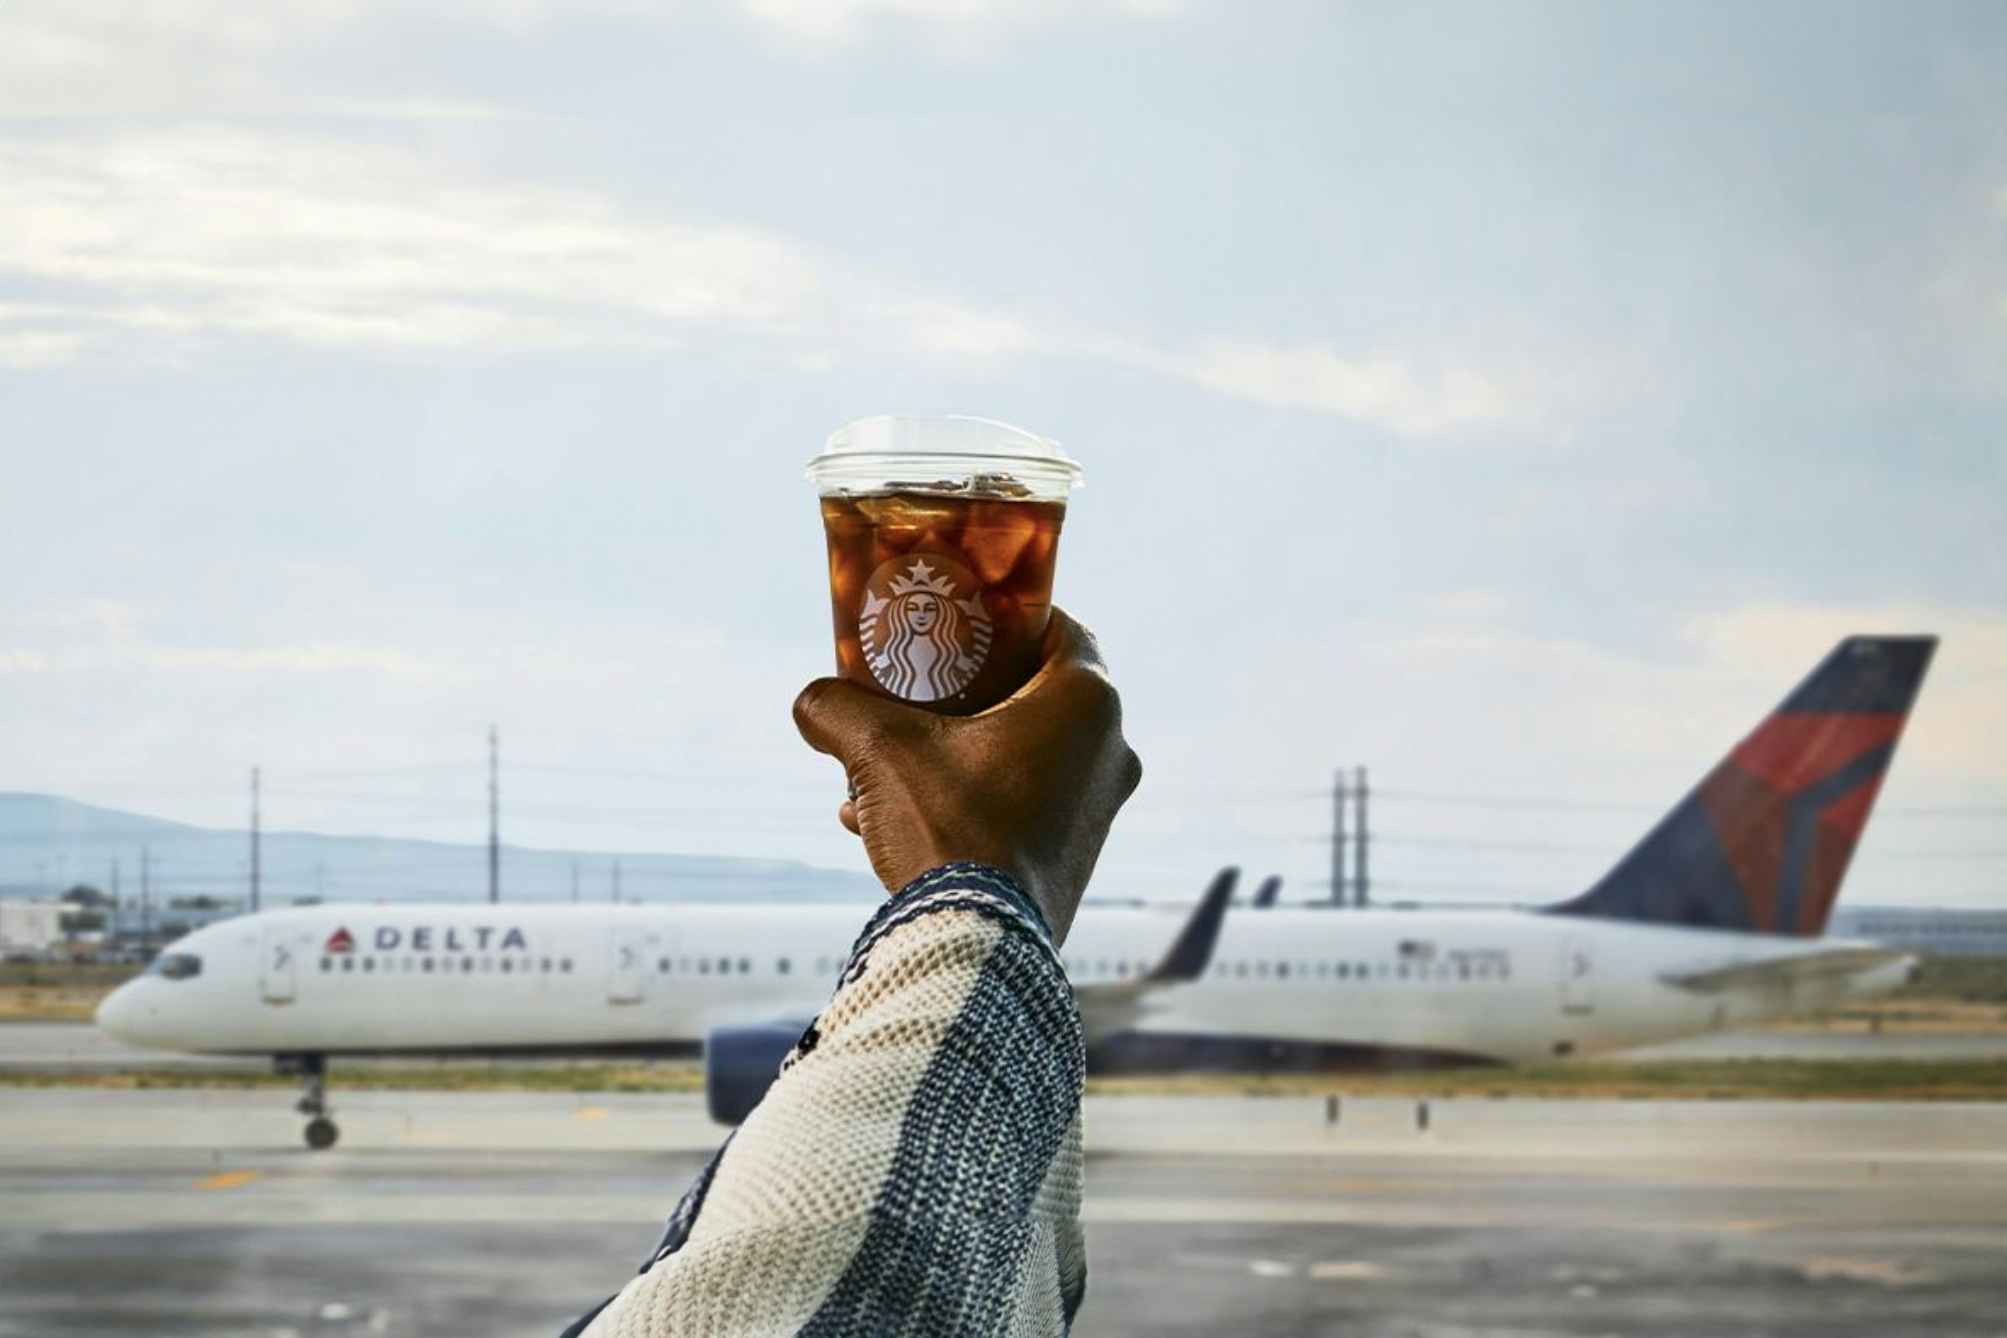 A hand holding a Starbucks coffee cup in front of a Delta Airlines plane